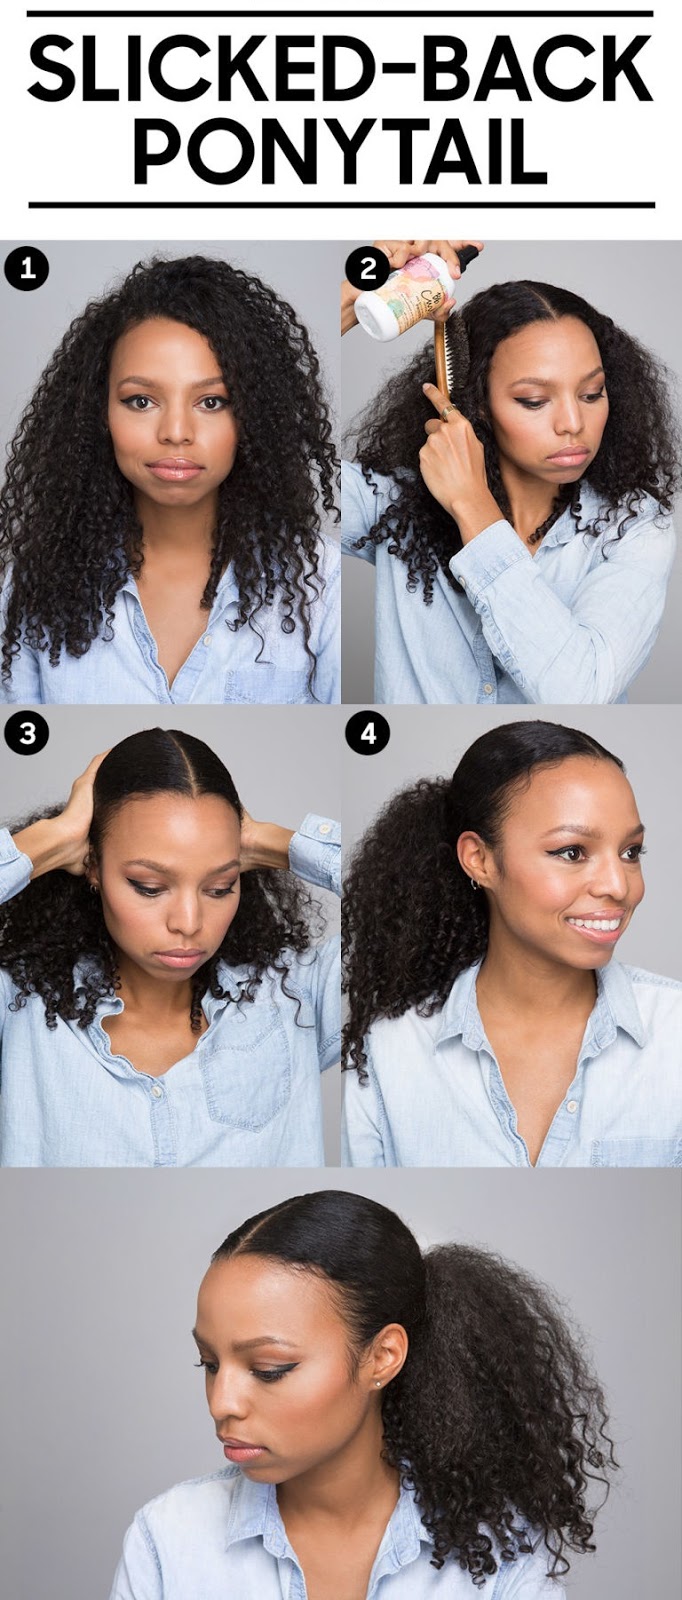 Slicked-back Ponytail for curly hair 